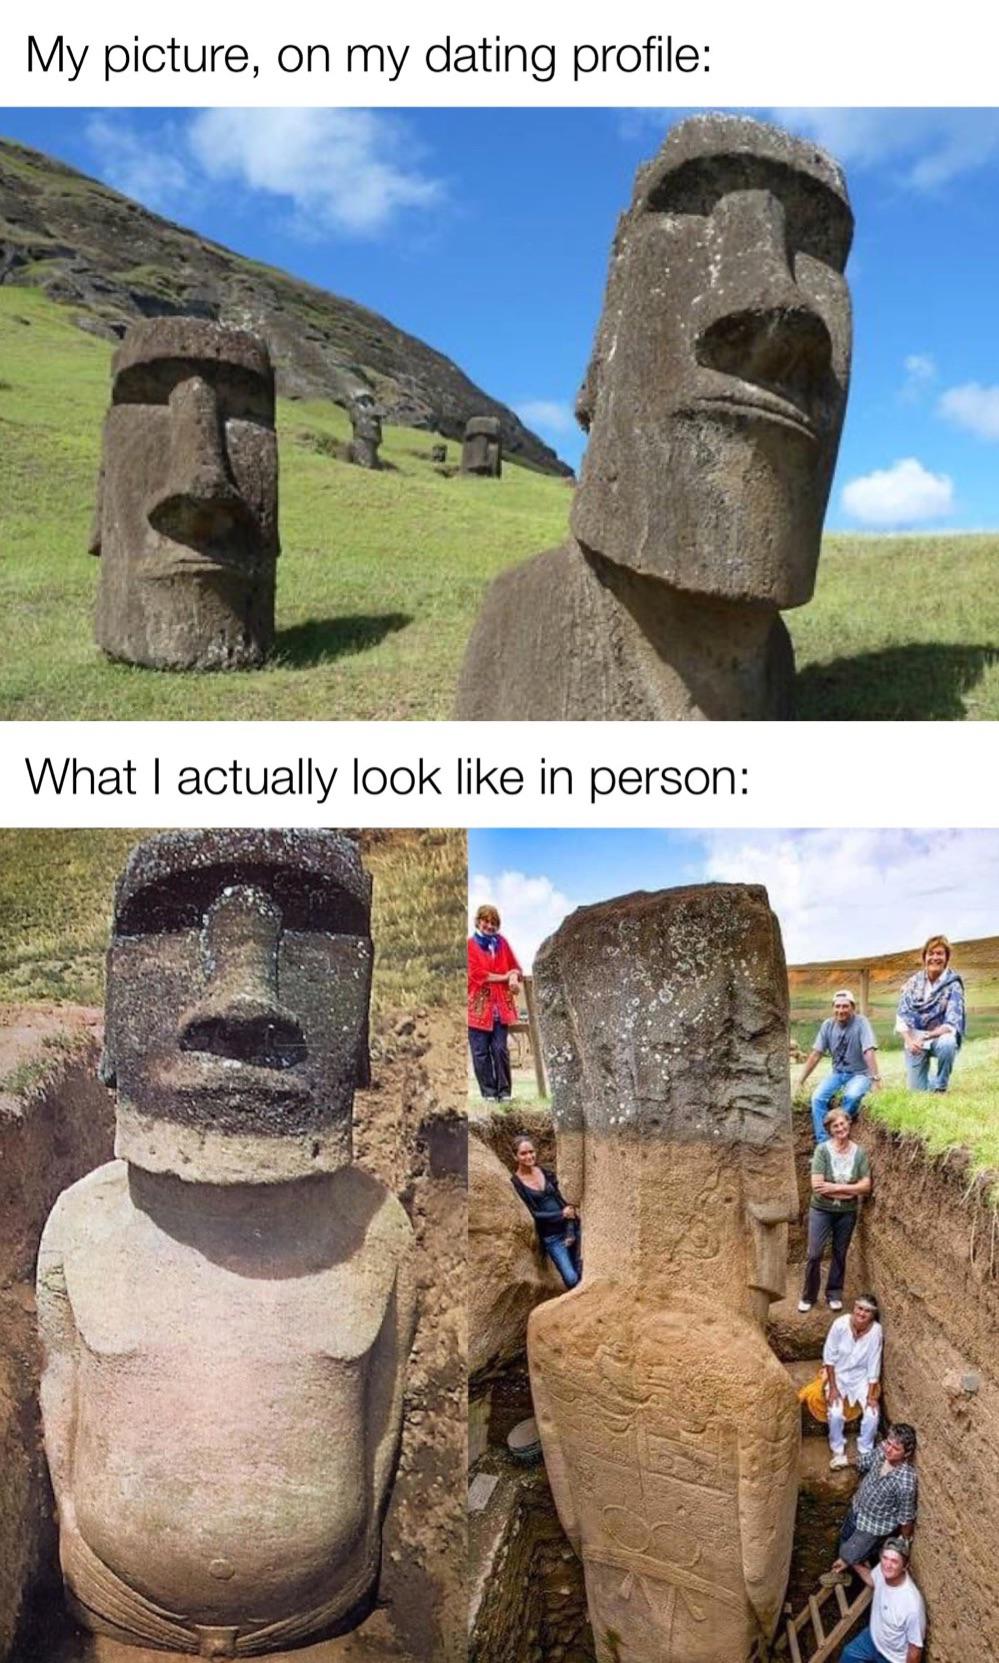 funny memes - easter island statues bodies - My picture, on my dating profile What I actually look in person Fles